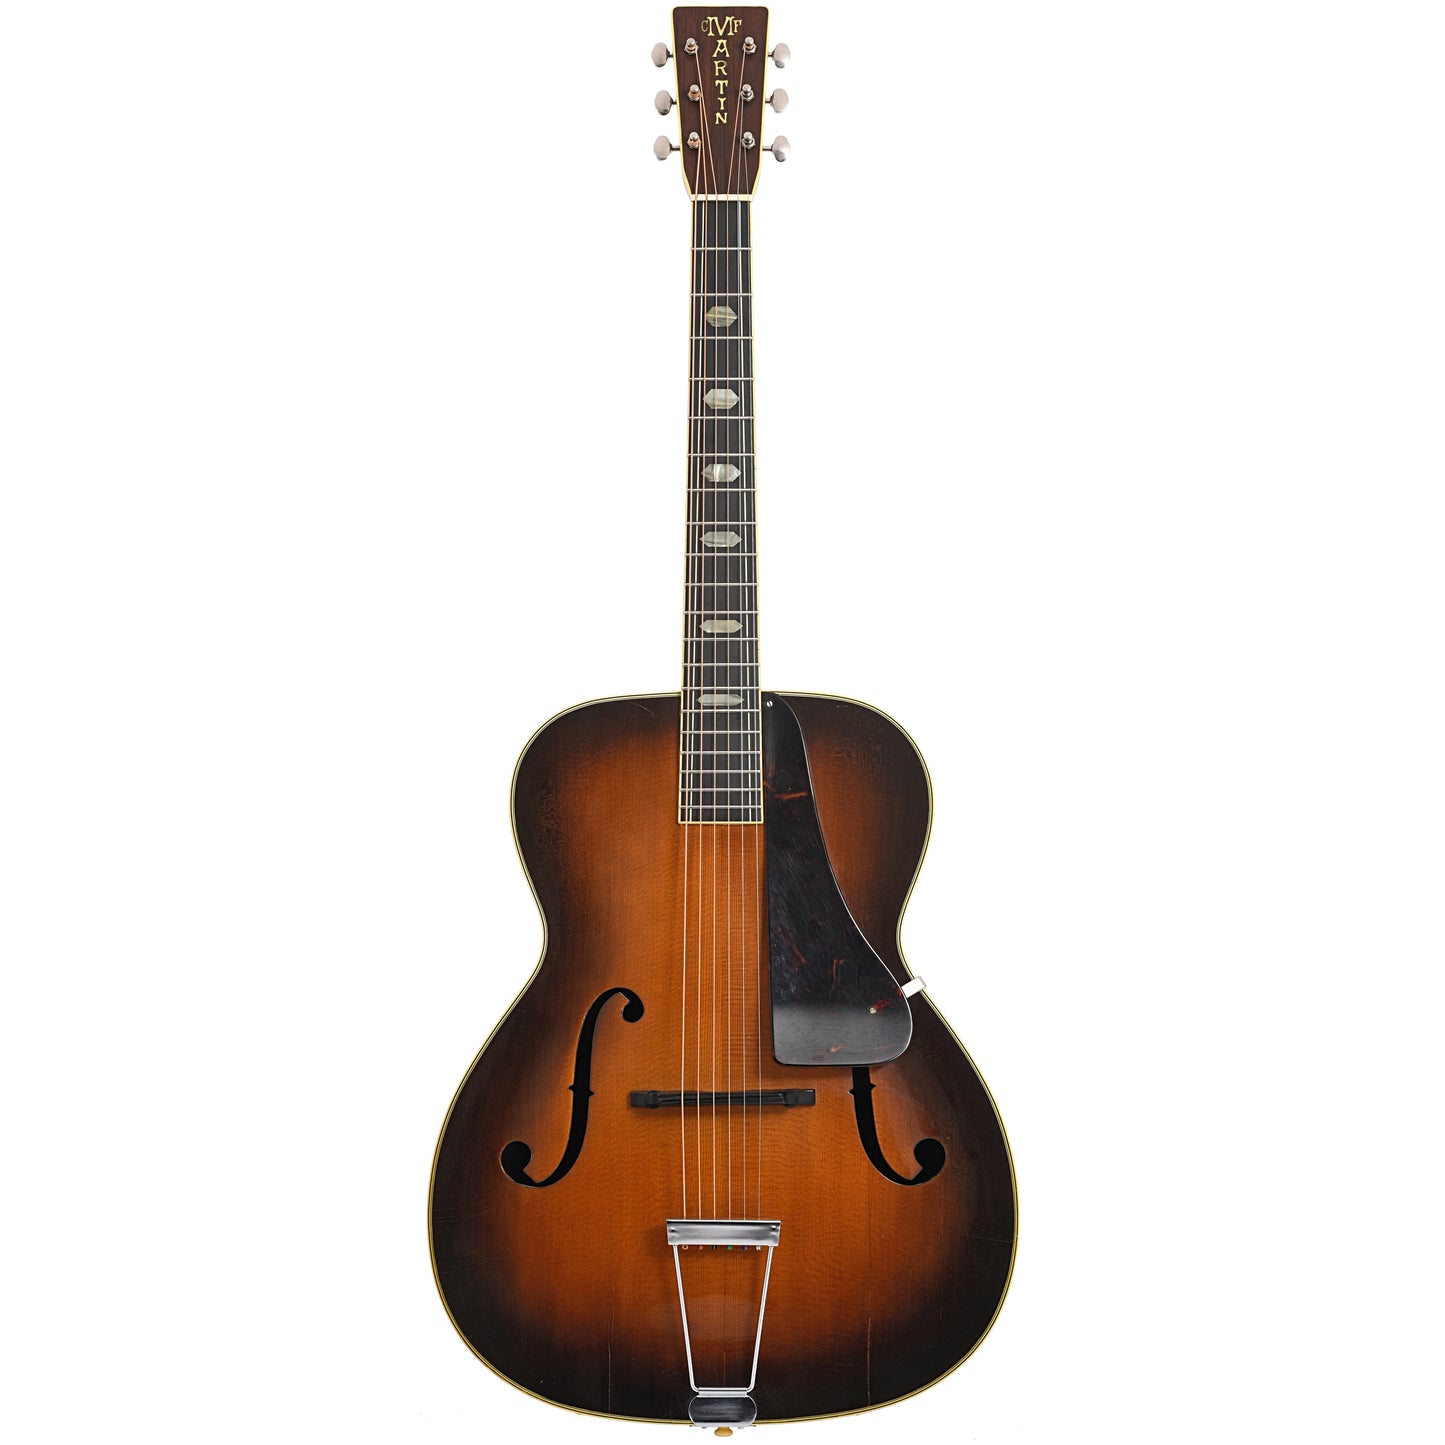 Full front of F-7 Archtop guitar